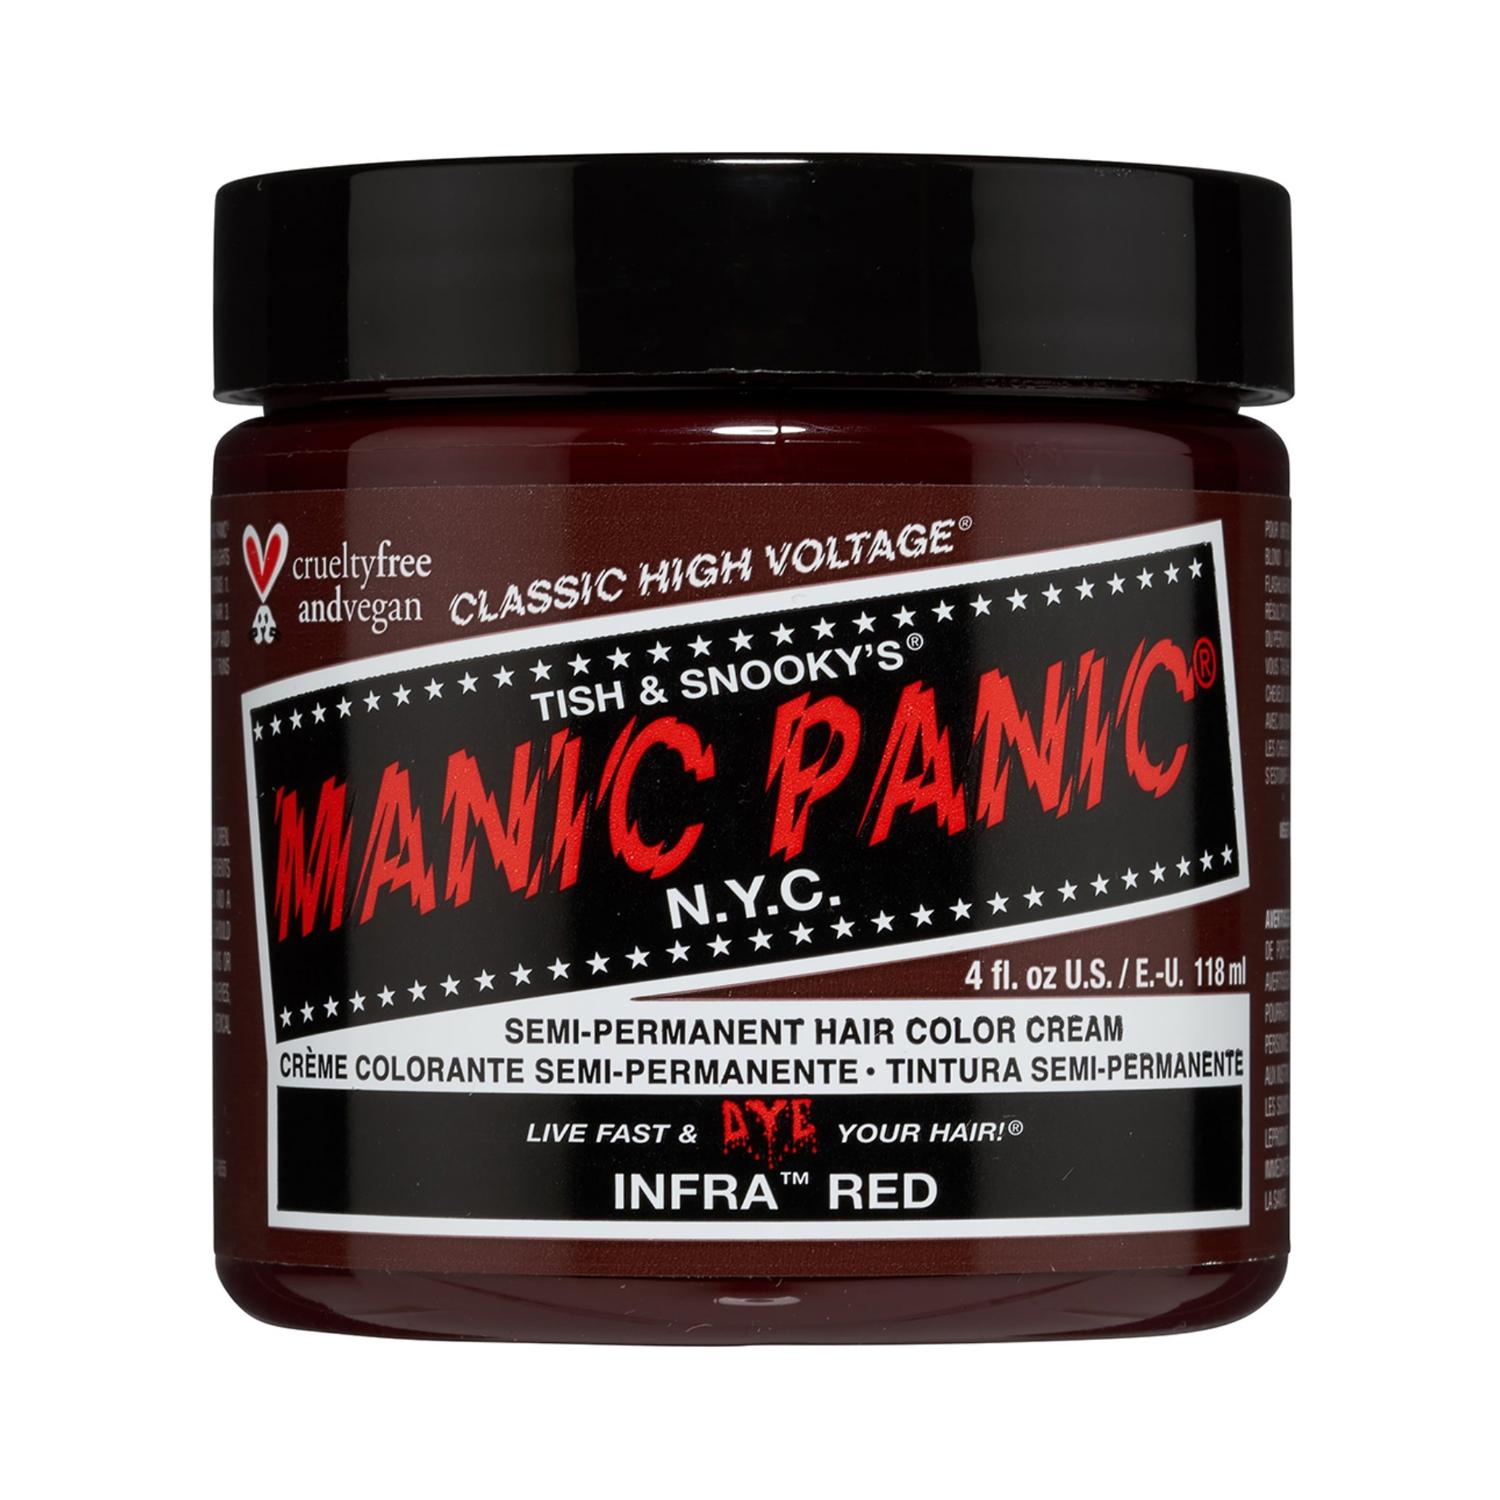 manic panic classic high voltage semi permanent hair color cream - infra red (118ml)